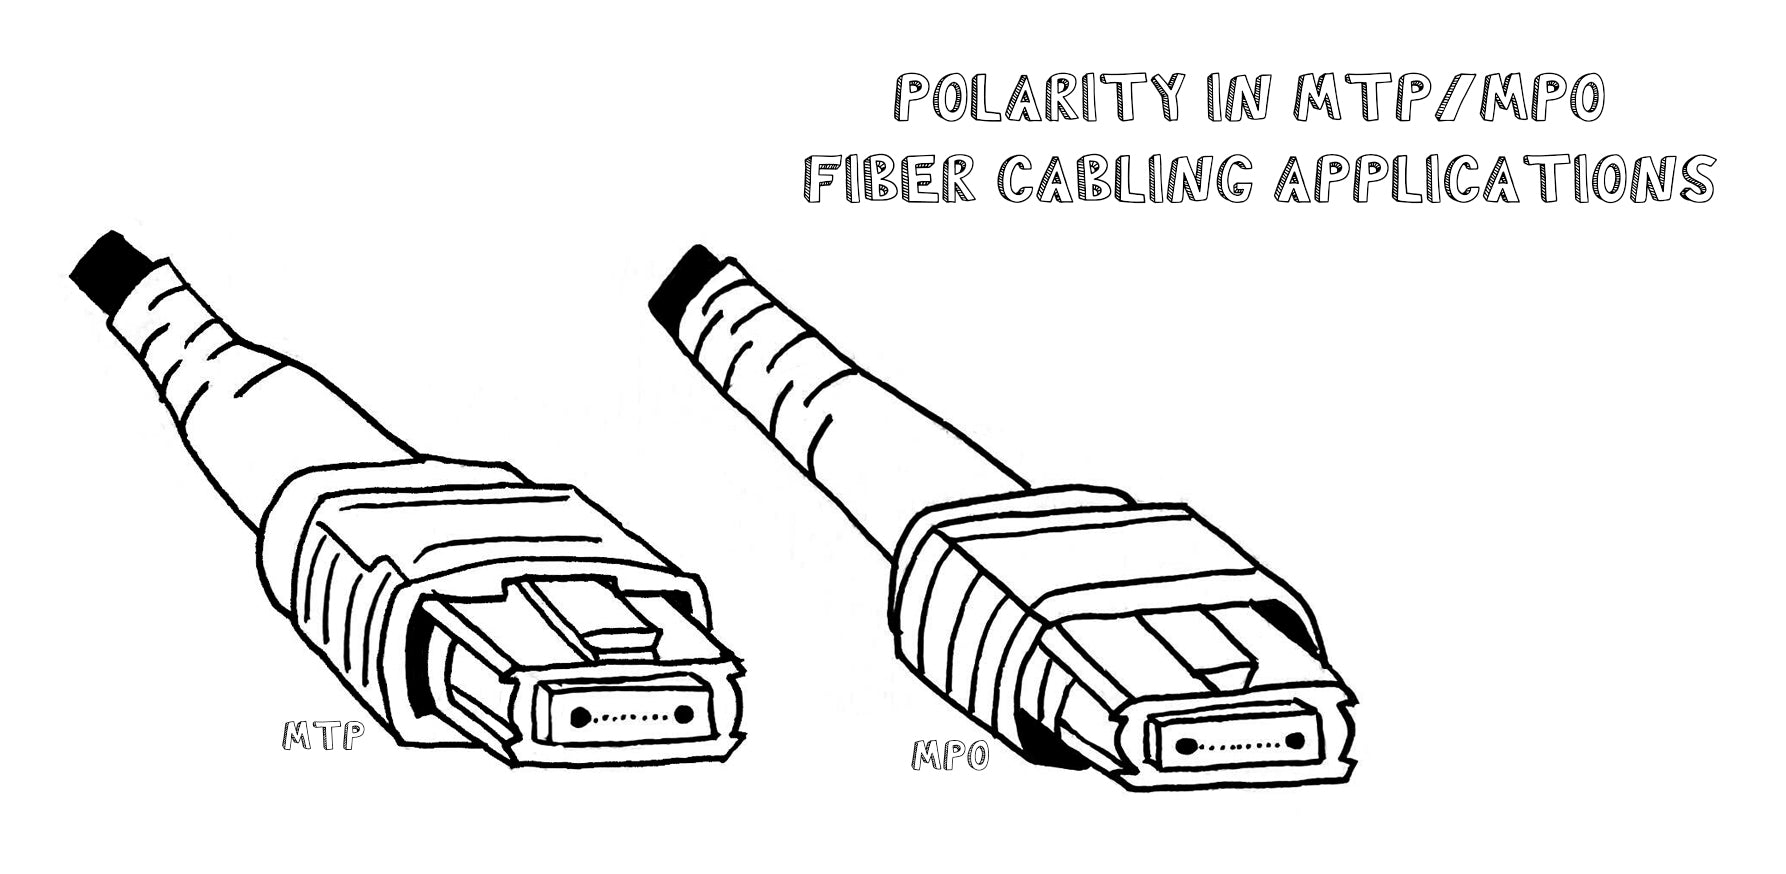 Polarity in MTP®/MPO Fiber Cabling Applications